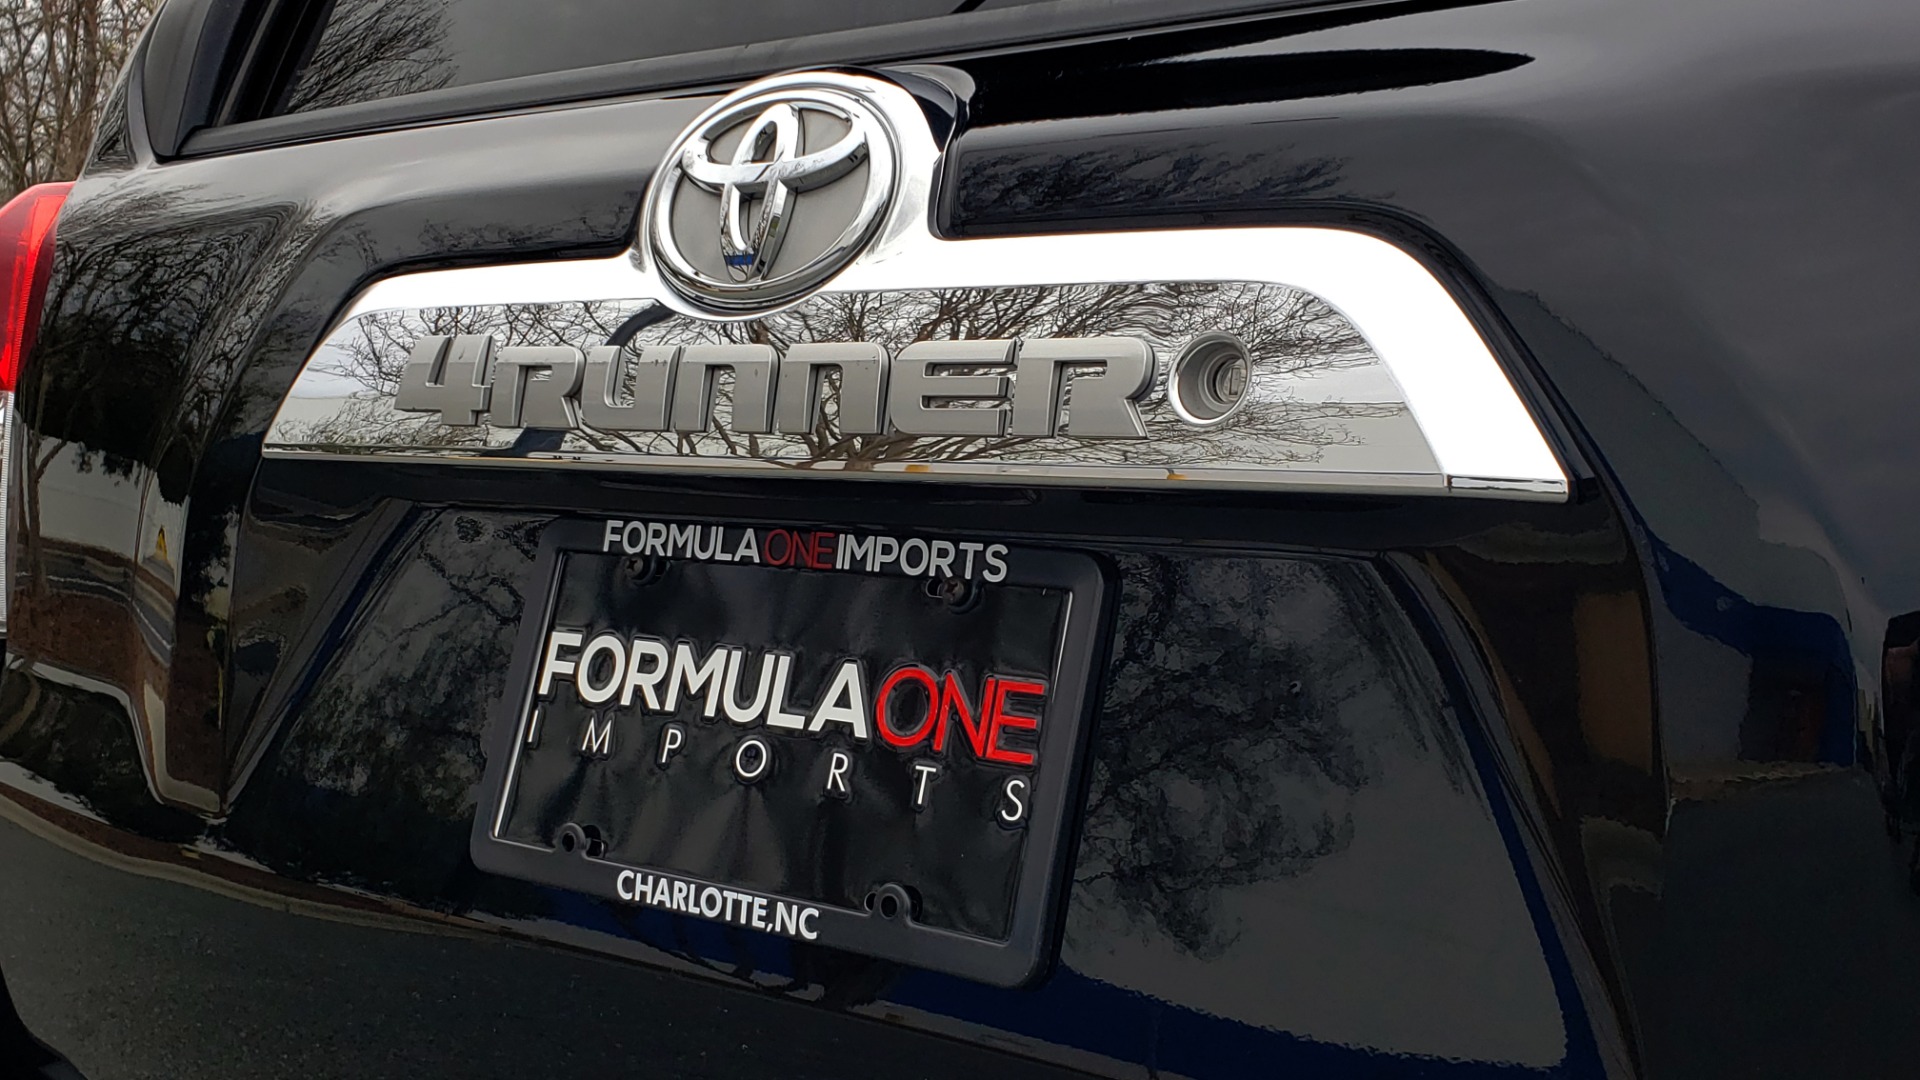 Used 2011 Toyota 4RUNNER SR5 2WD / 5-SPD AUTO / 4.0L V6 / SAT RADIO / PWR STS for sale Sold at Formula Imports in Charlotte NC 28227 29